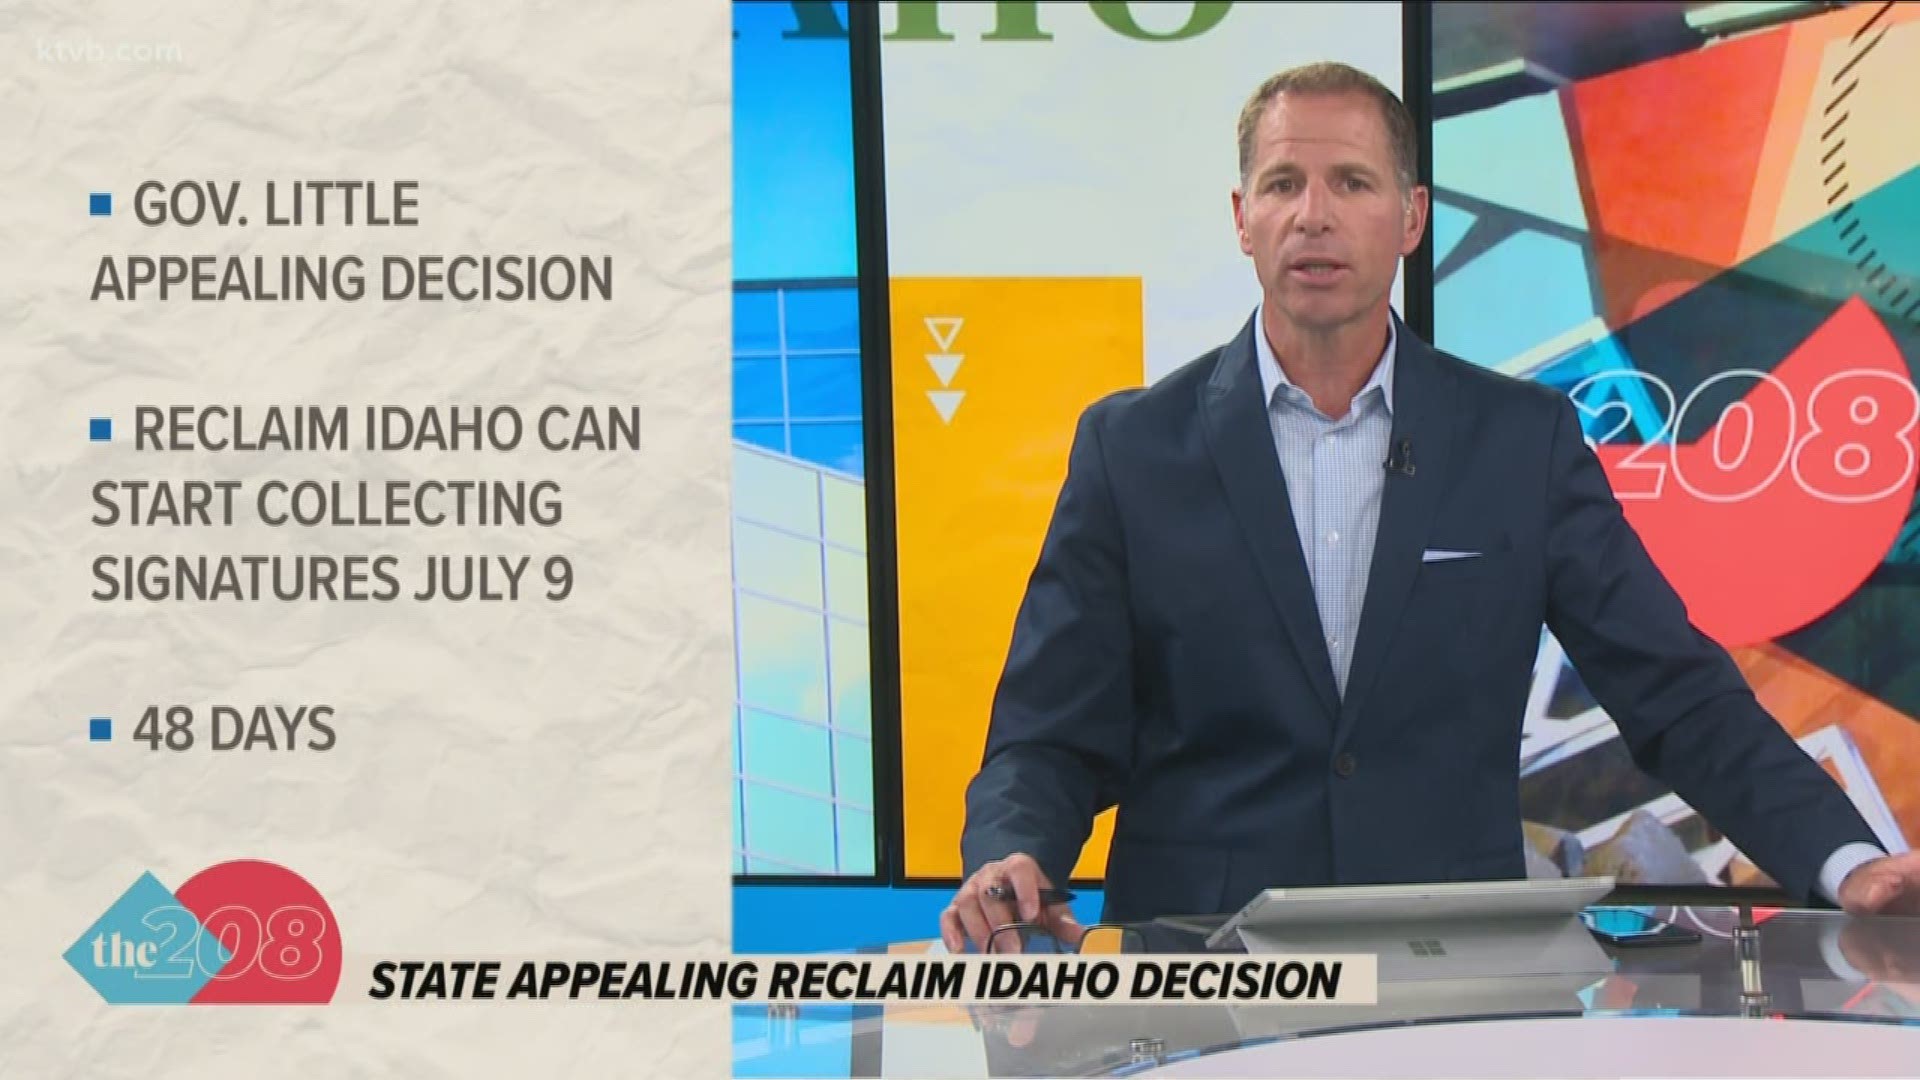 A judge gave Reclaim Idaho more time to collect signatures for their education funding initiative. The state is continuing to fight the decision in court.